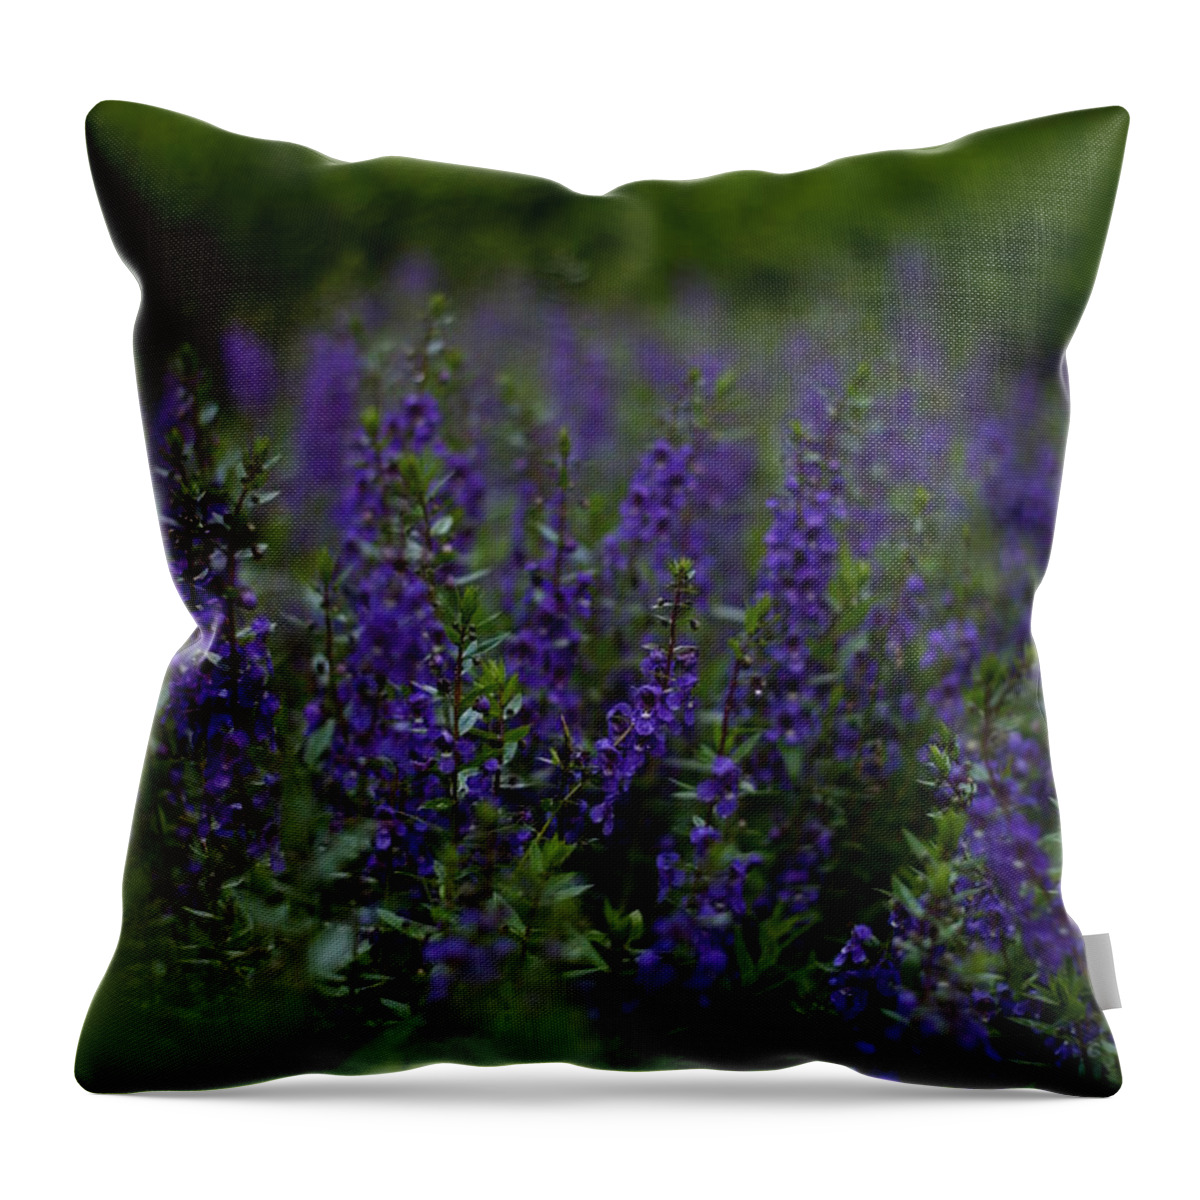 Flower Throw Pillow featuring the photograph Elizabethan Gardens by Andreas Freund